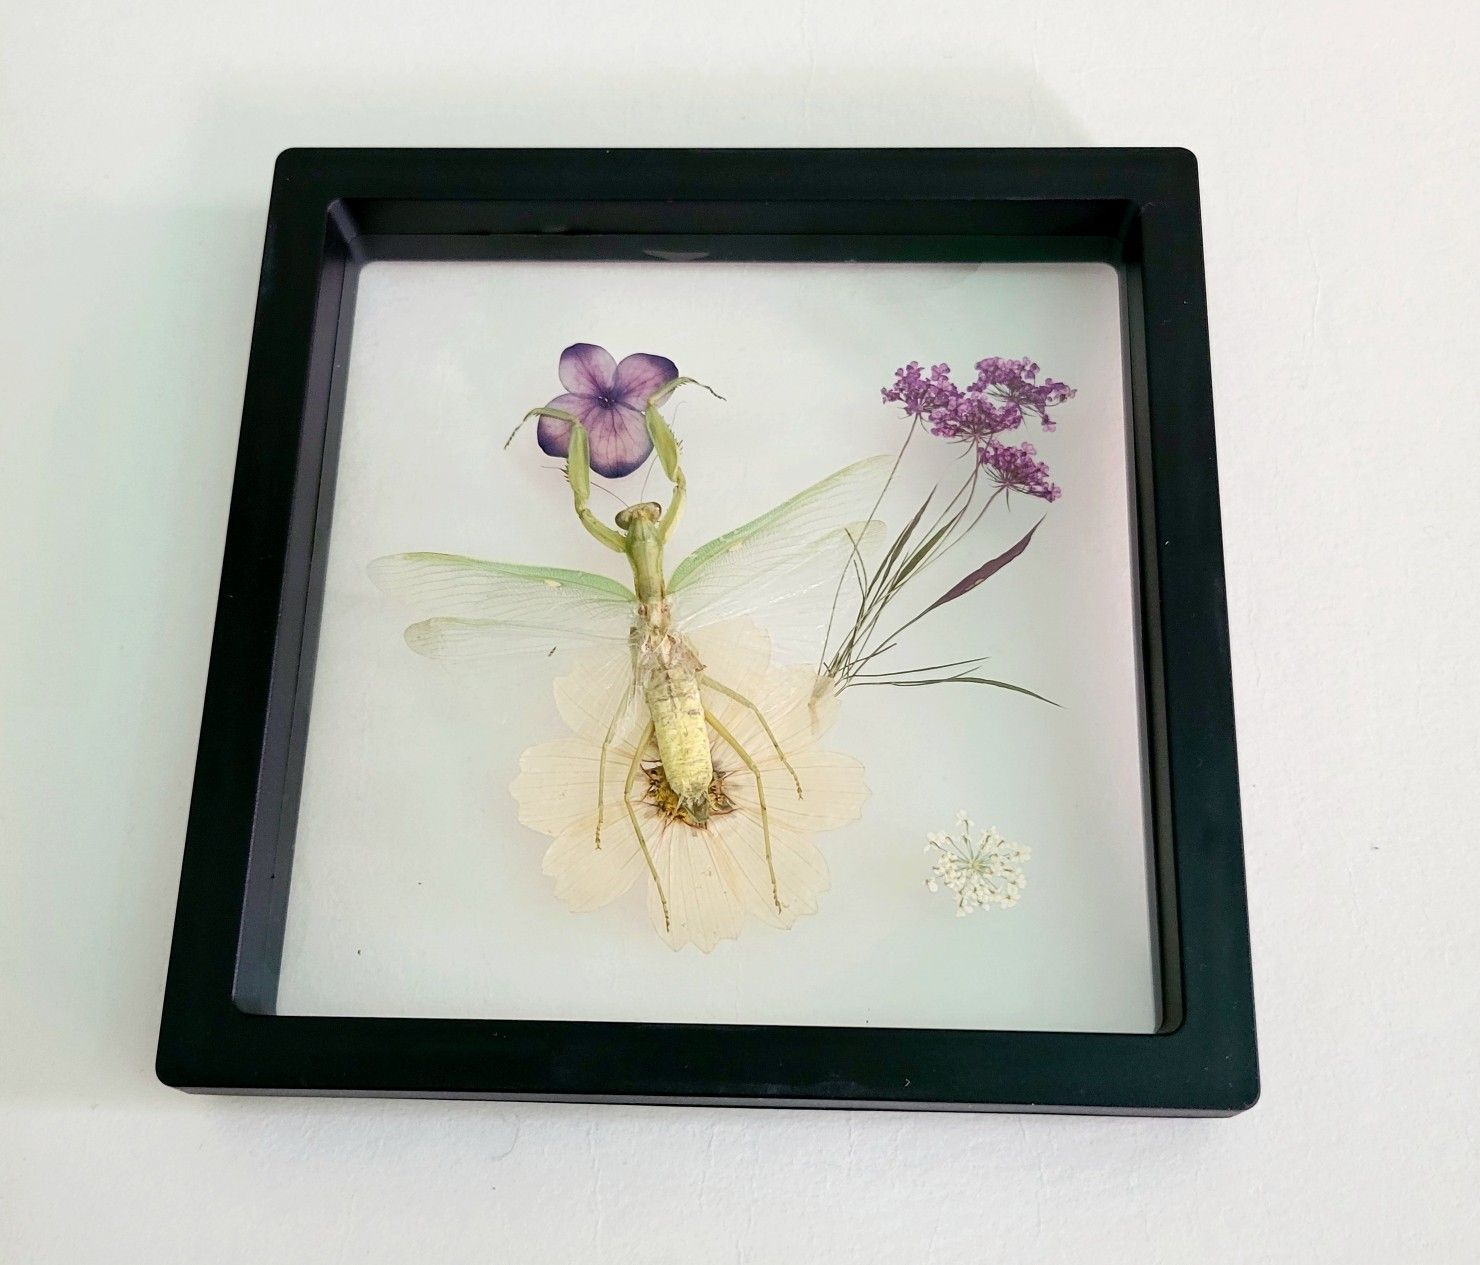 mantis with purple flower, art by Sherrie Thai of Shaireproductions.com